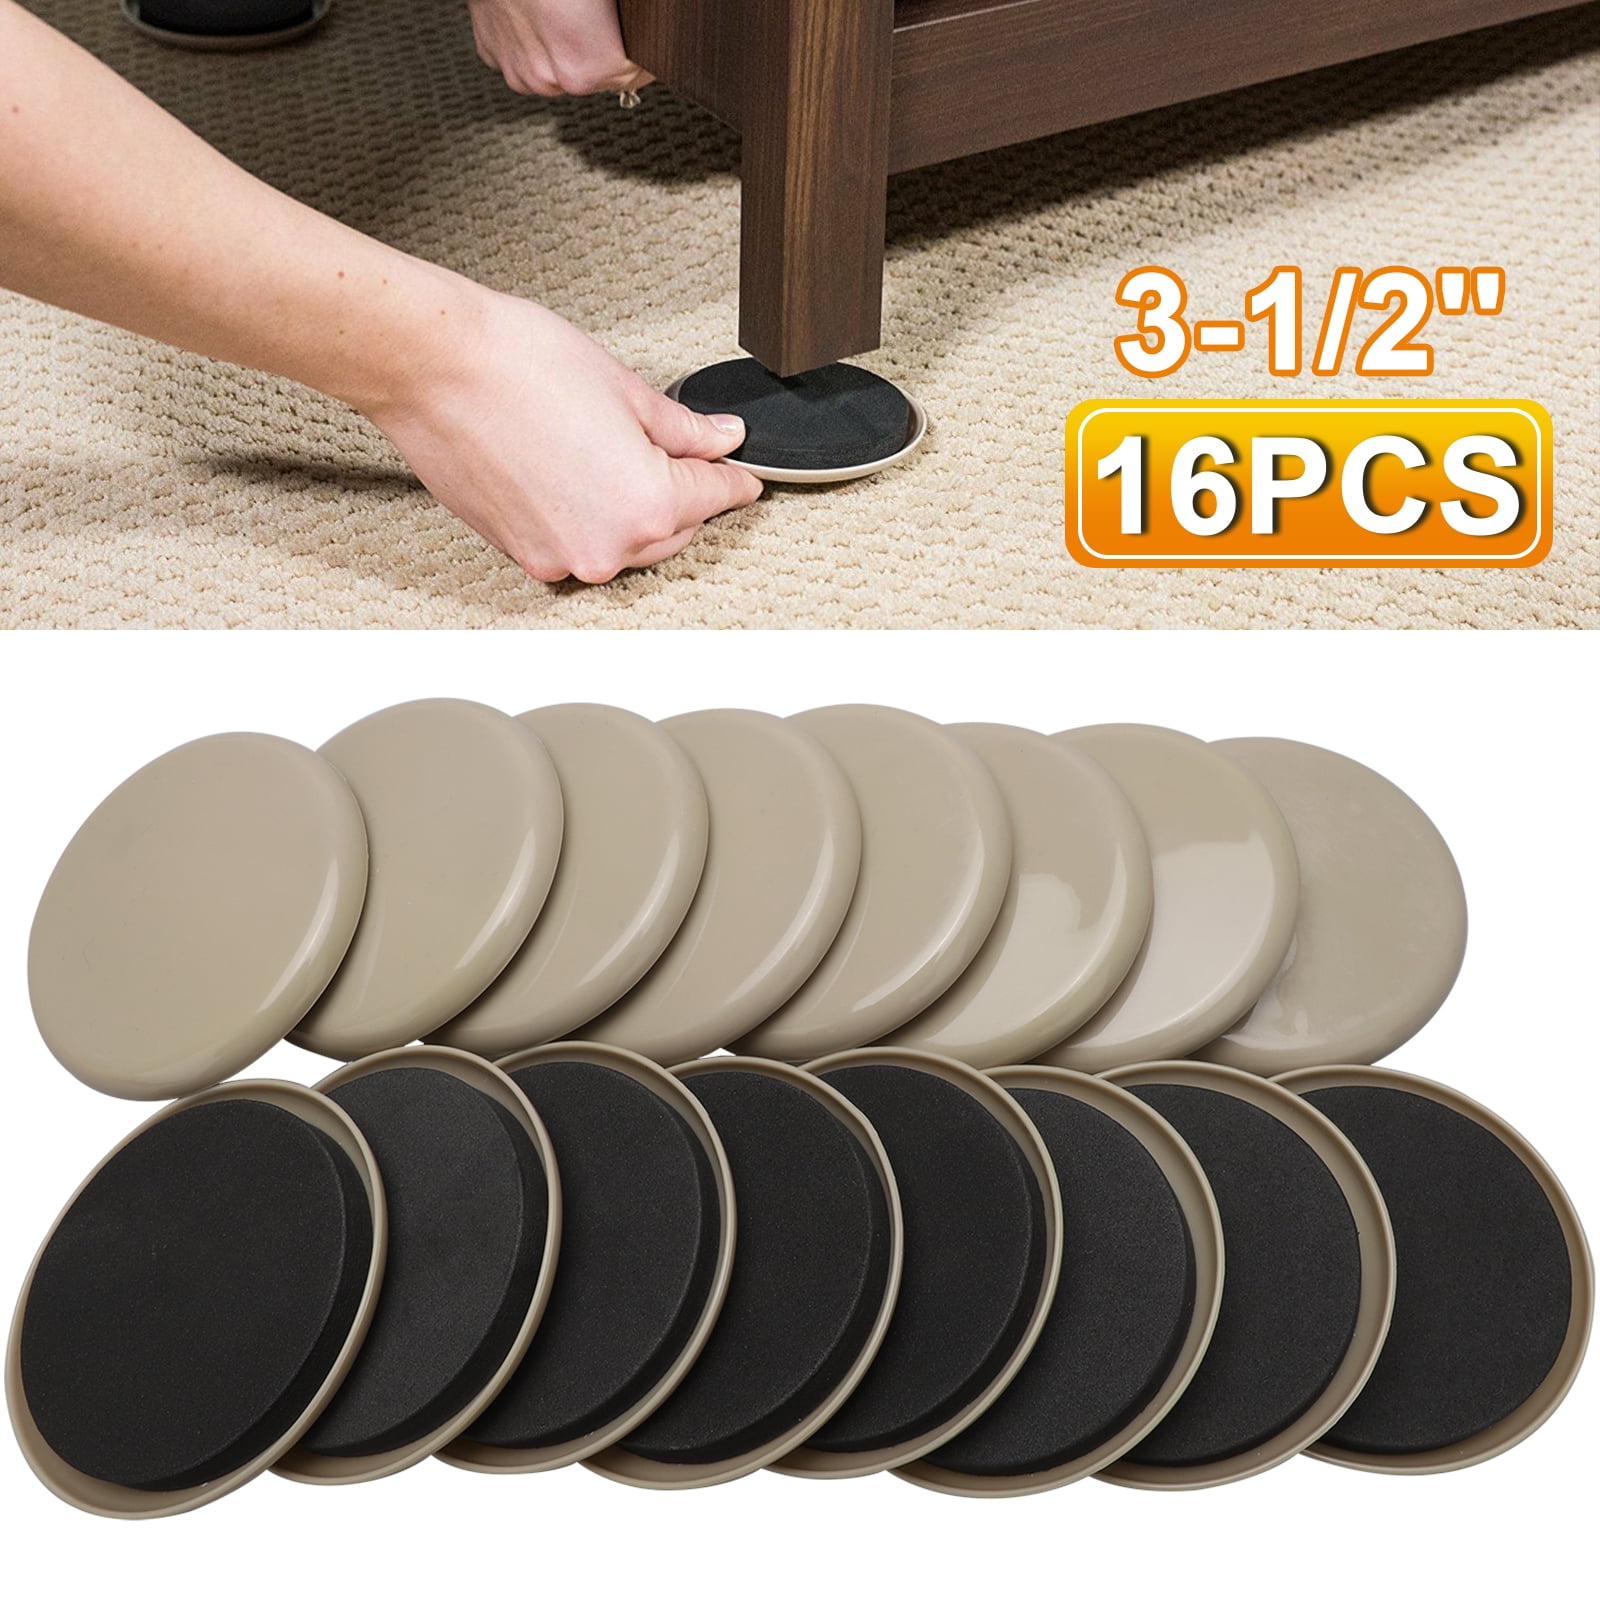 Reusable Furniture Sliders for Carpeted Surfaces Move Heavy Furniture 